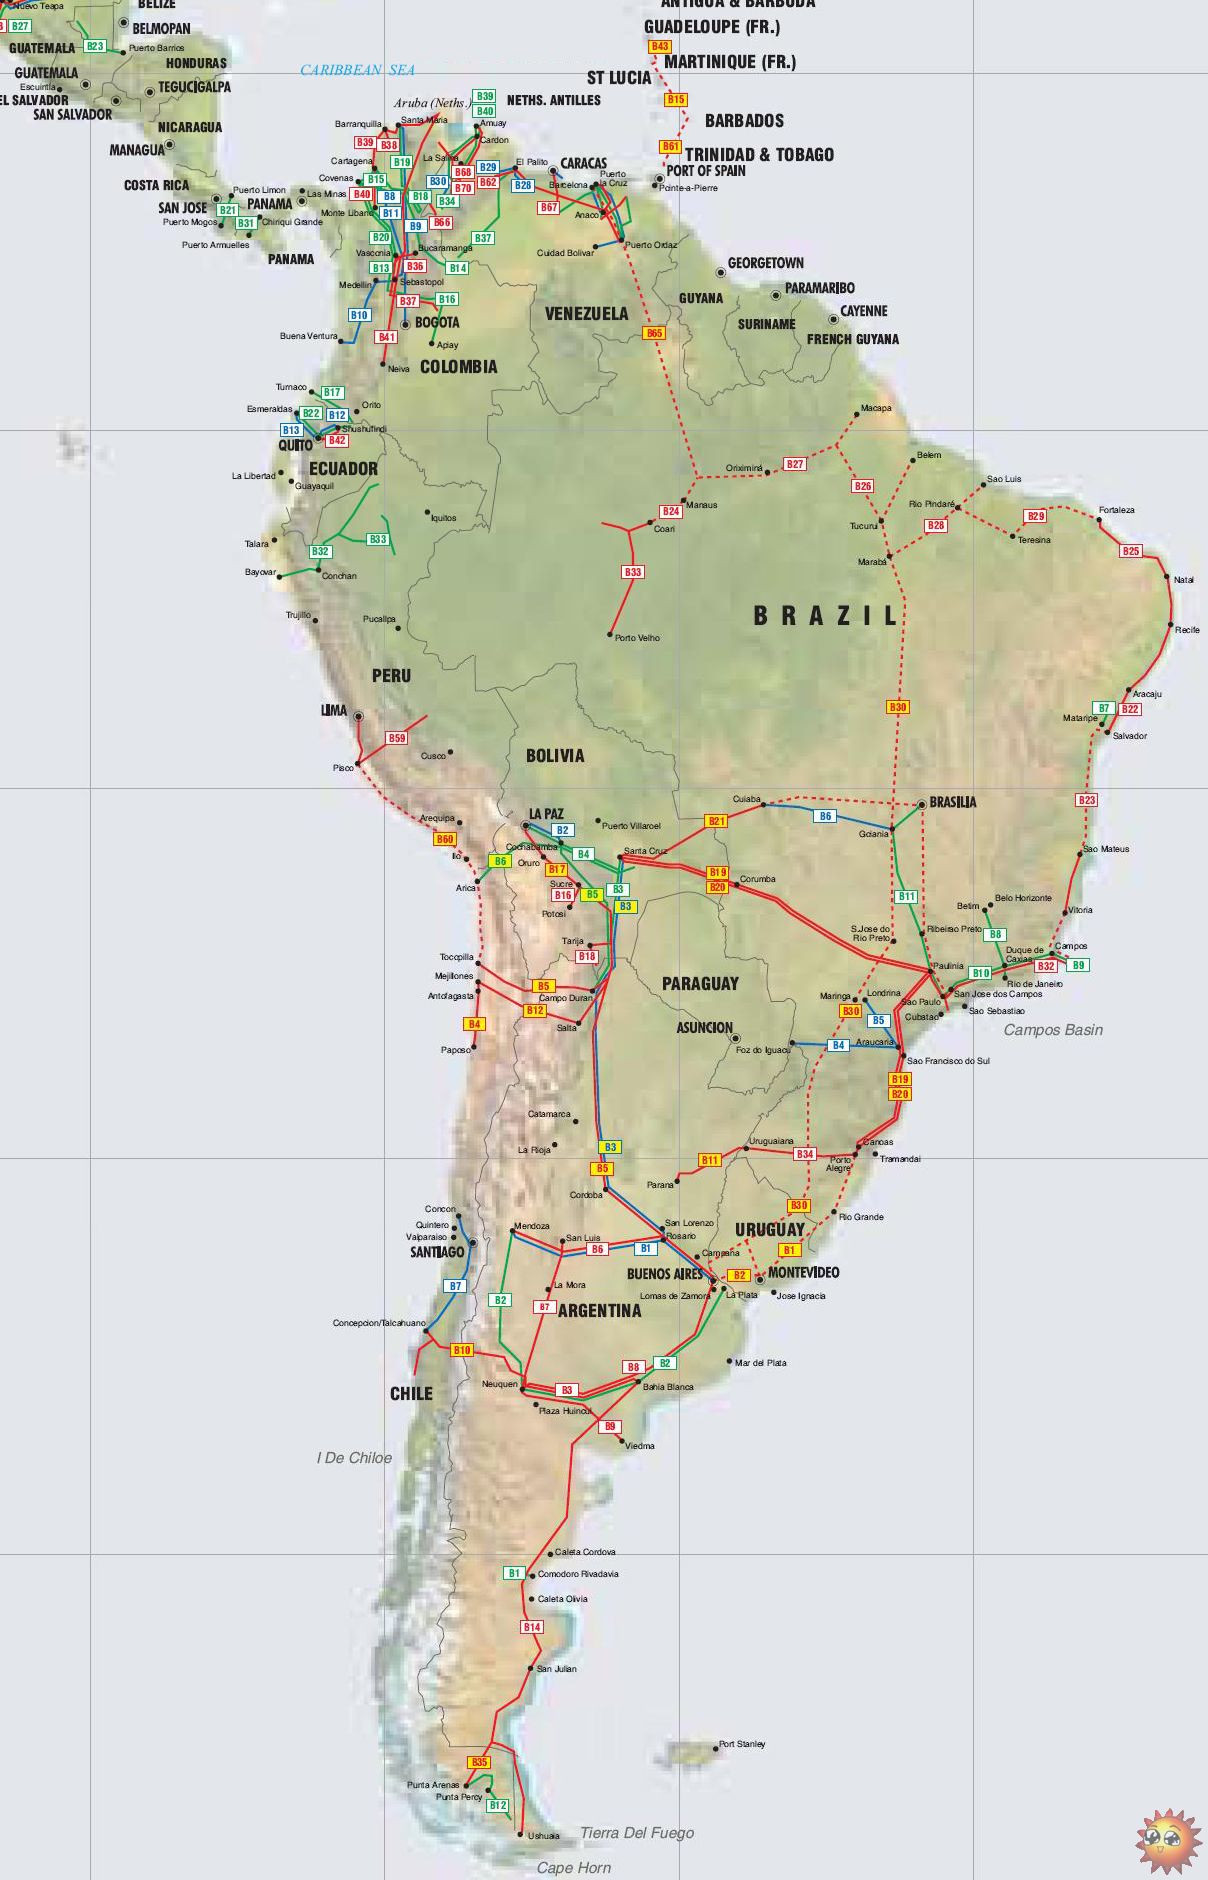 central_america_south_america_caribbean_pipelines_map.jpg